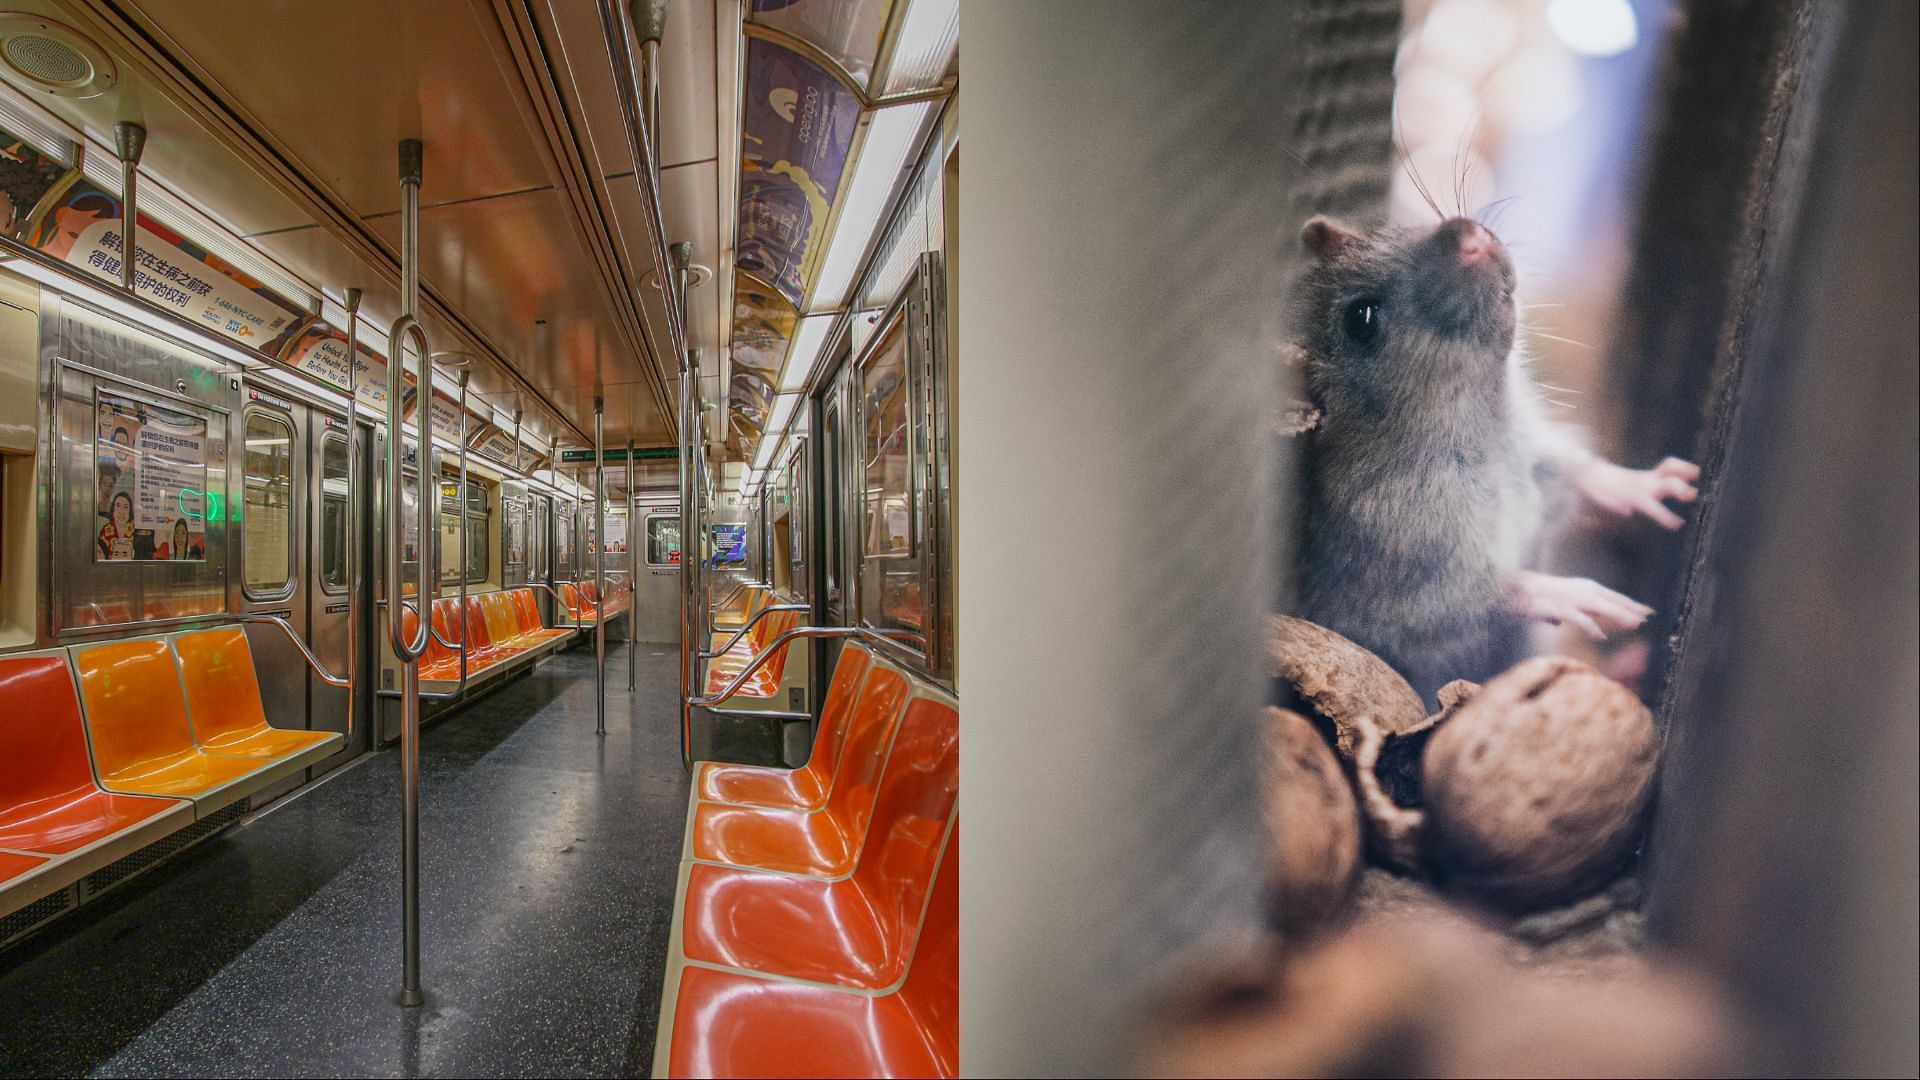 Homeless man found with several rats. (Images via Pexels/ by Pixaby&amp; DSD)